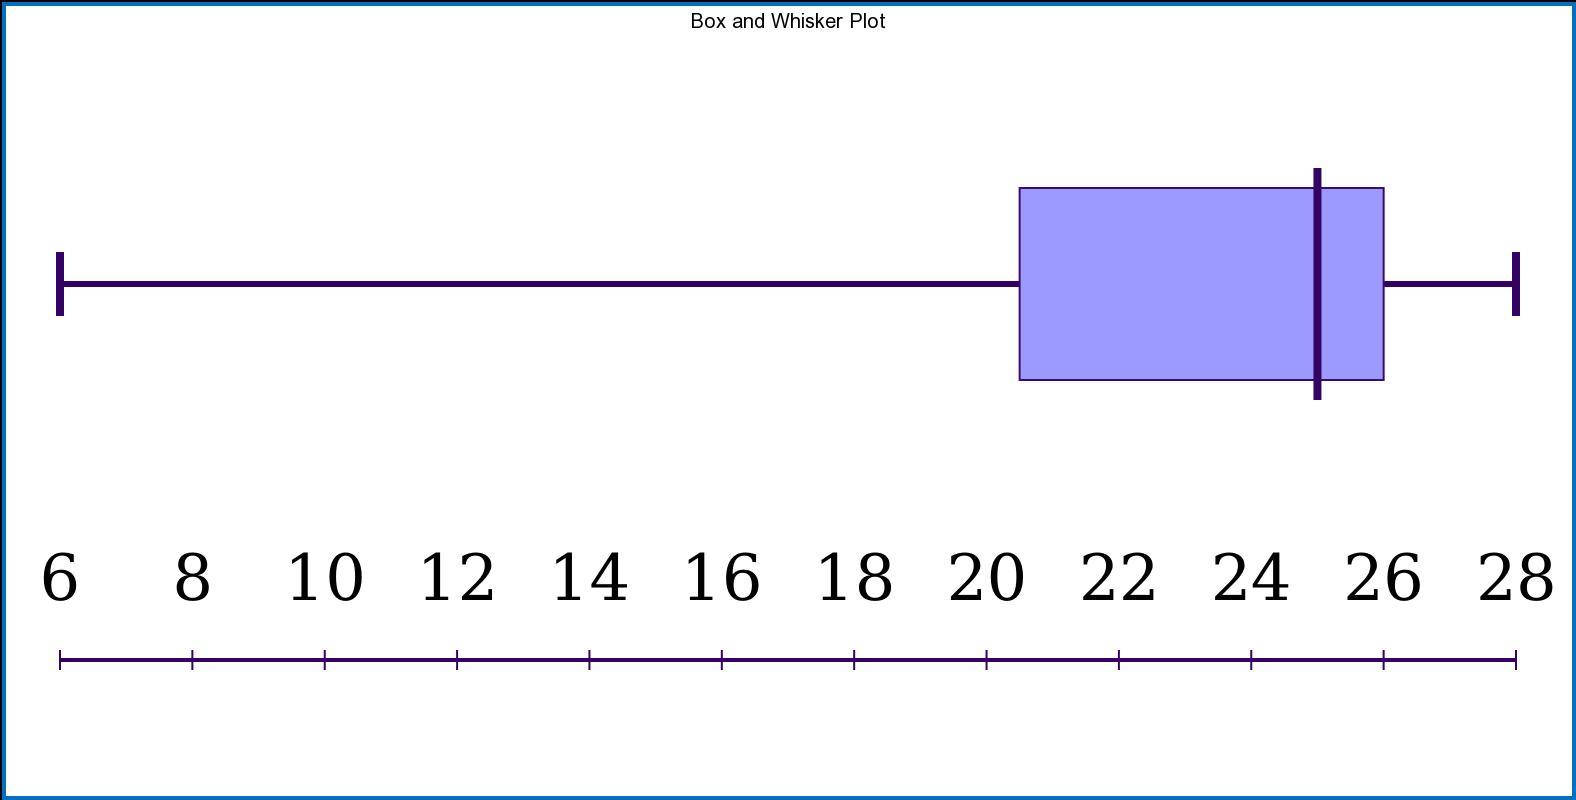 Spread Of Data Worksheet1. Construct The Box-and-whisker Plot For The Number Of Episodes In Each Season